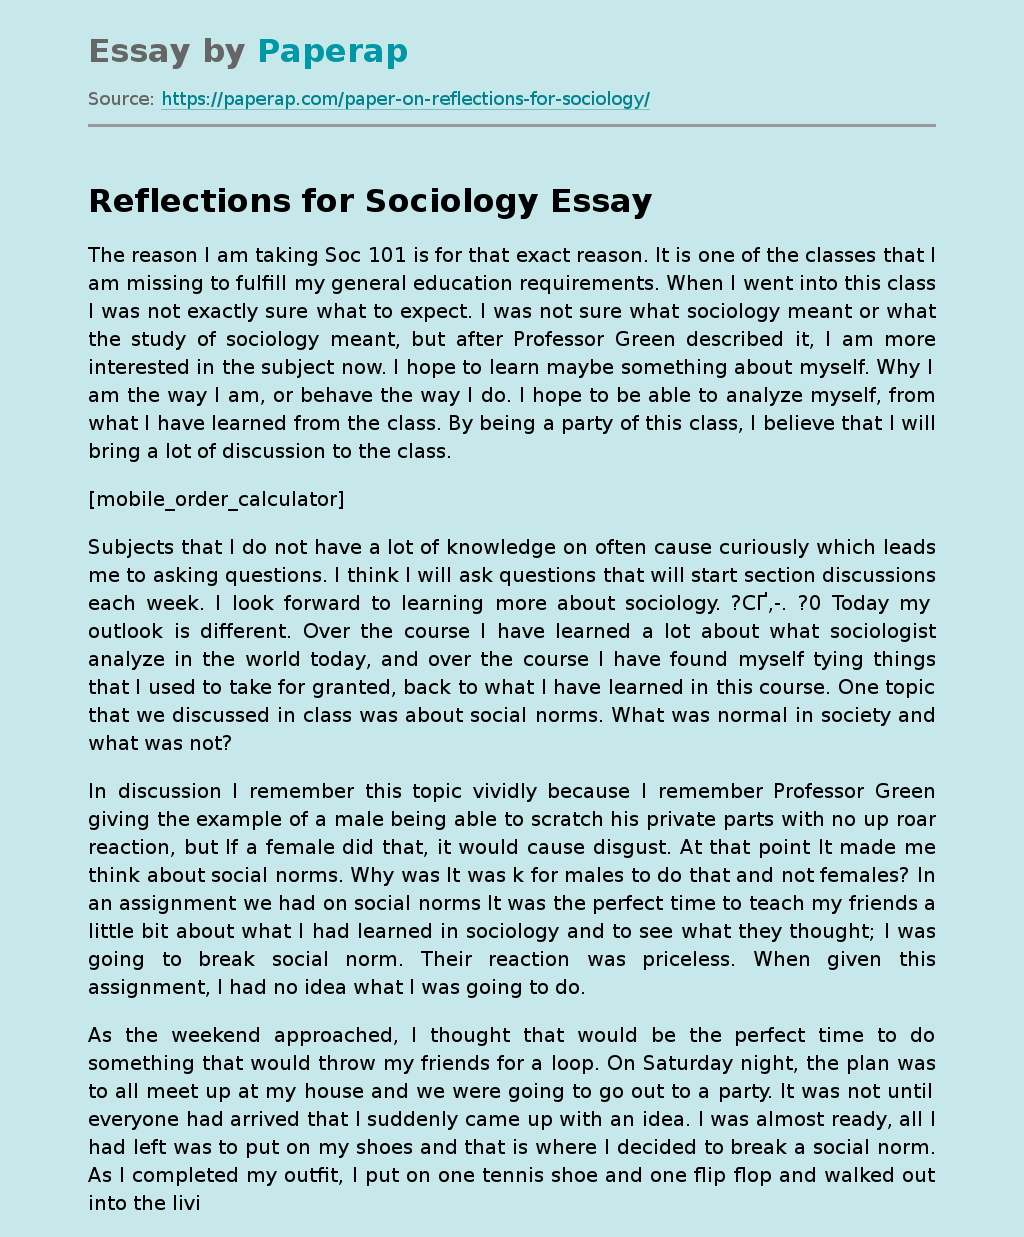 Reflections for Sociology